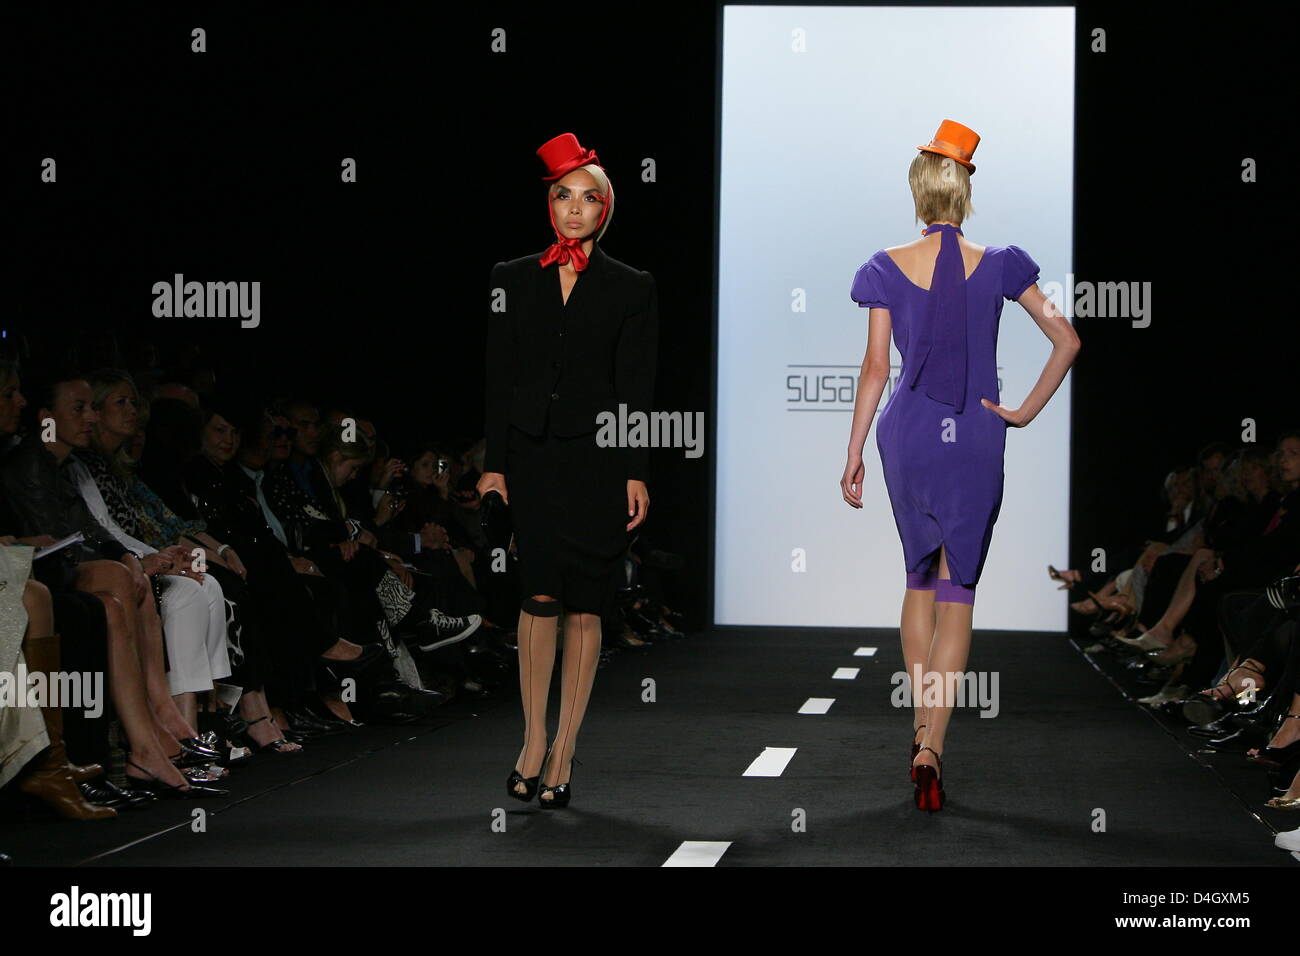 Reparation mulig sko bue Models march down a catwalk decorated with a centre strip to present the  new collection of German label 'Susanne Wiebe' during the Mercedes-Benz  Fashionweek in Berlin, Germany, 17 July 2008. The 2009